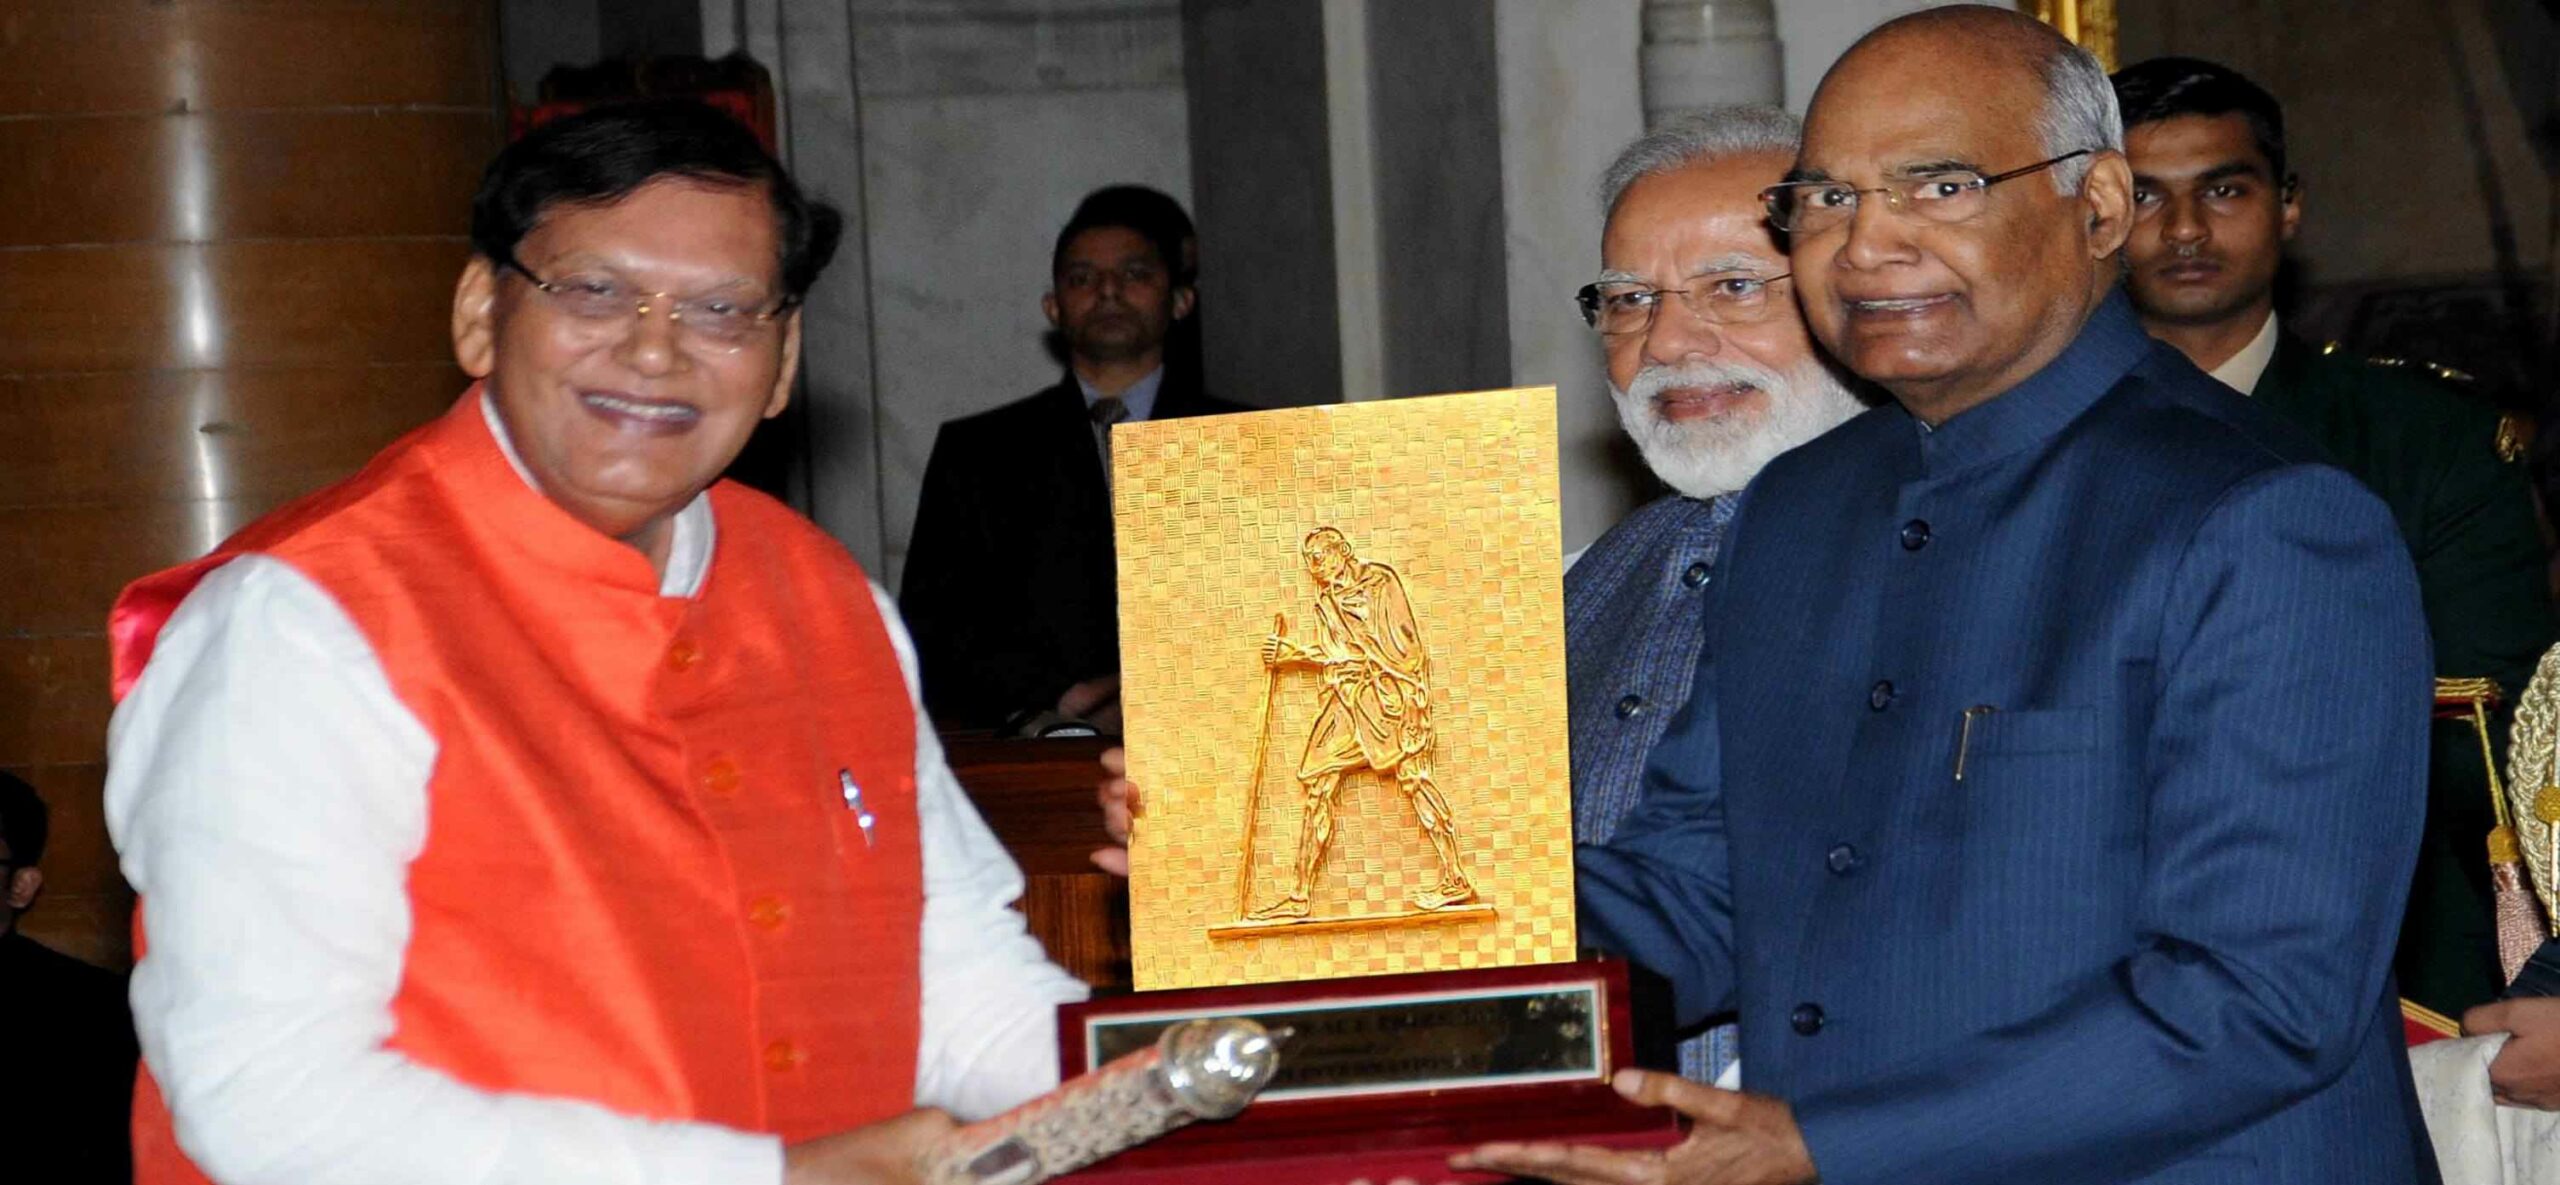 Bindeshwar Pathak has been widely recognised for his work.